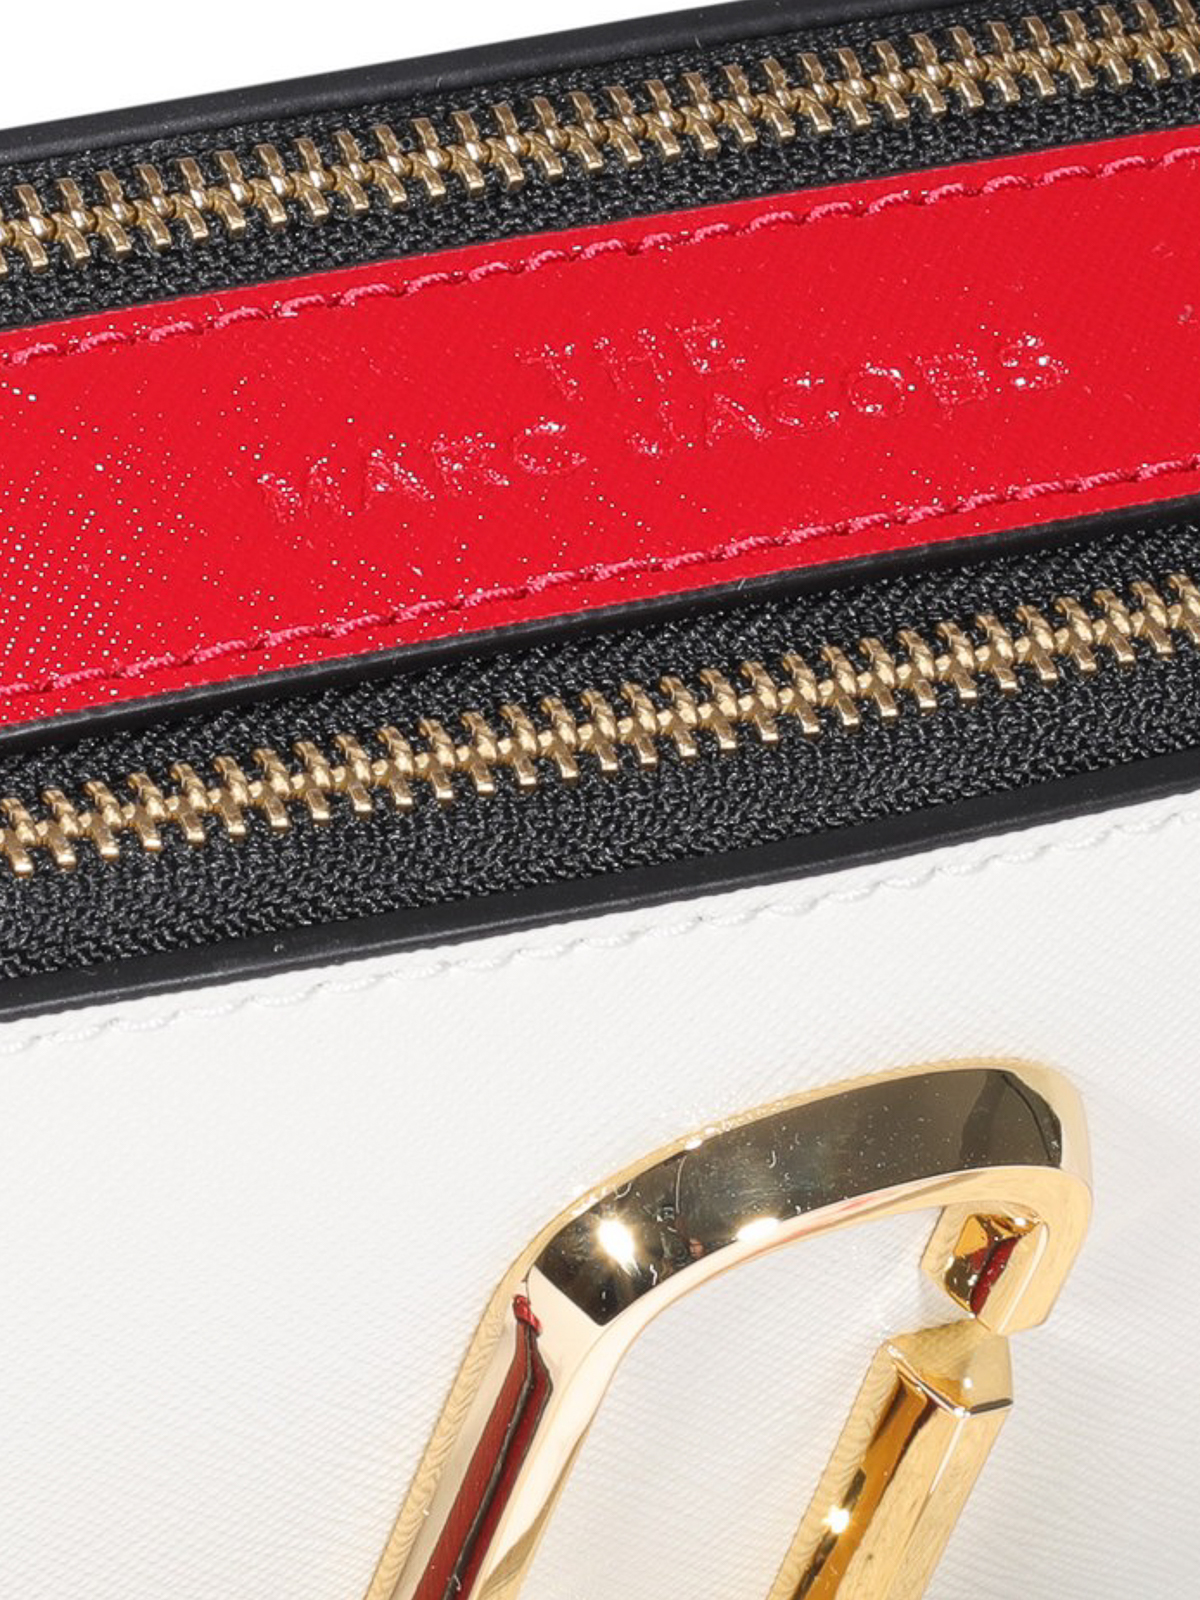 Marc Jacobs - Buy Online at